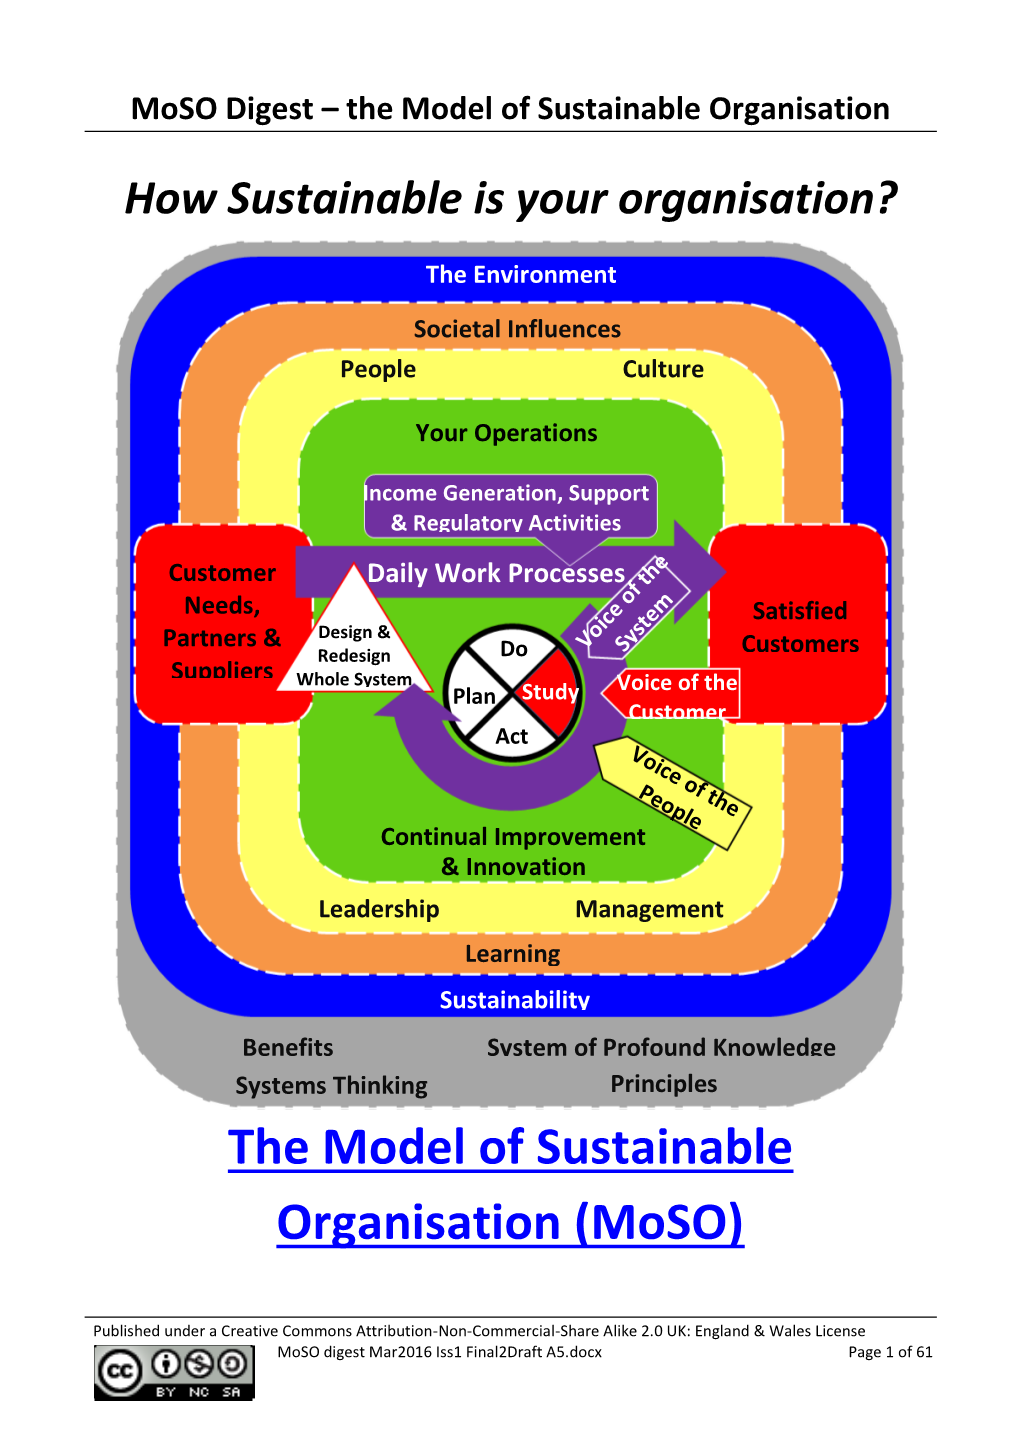 The Model of Sustainable Organisation (Moso)